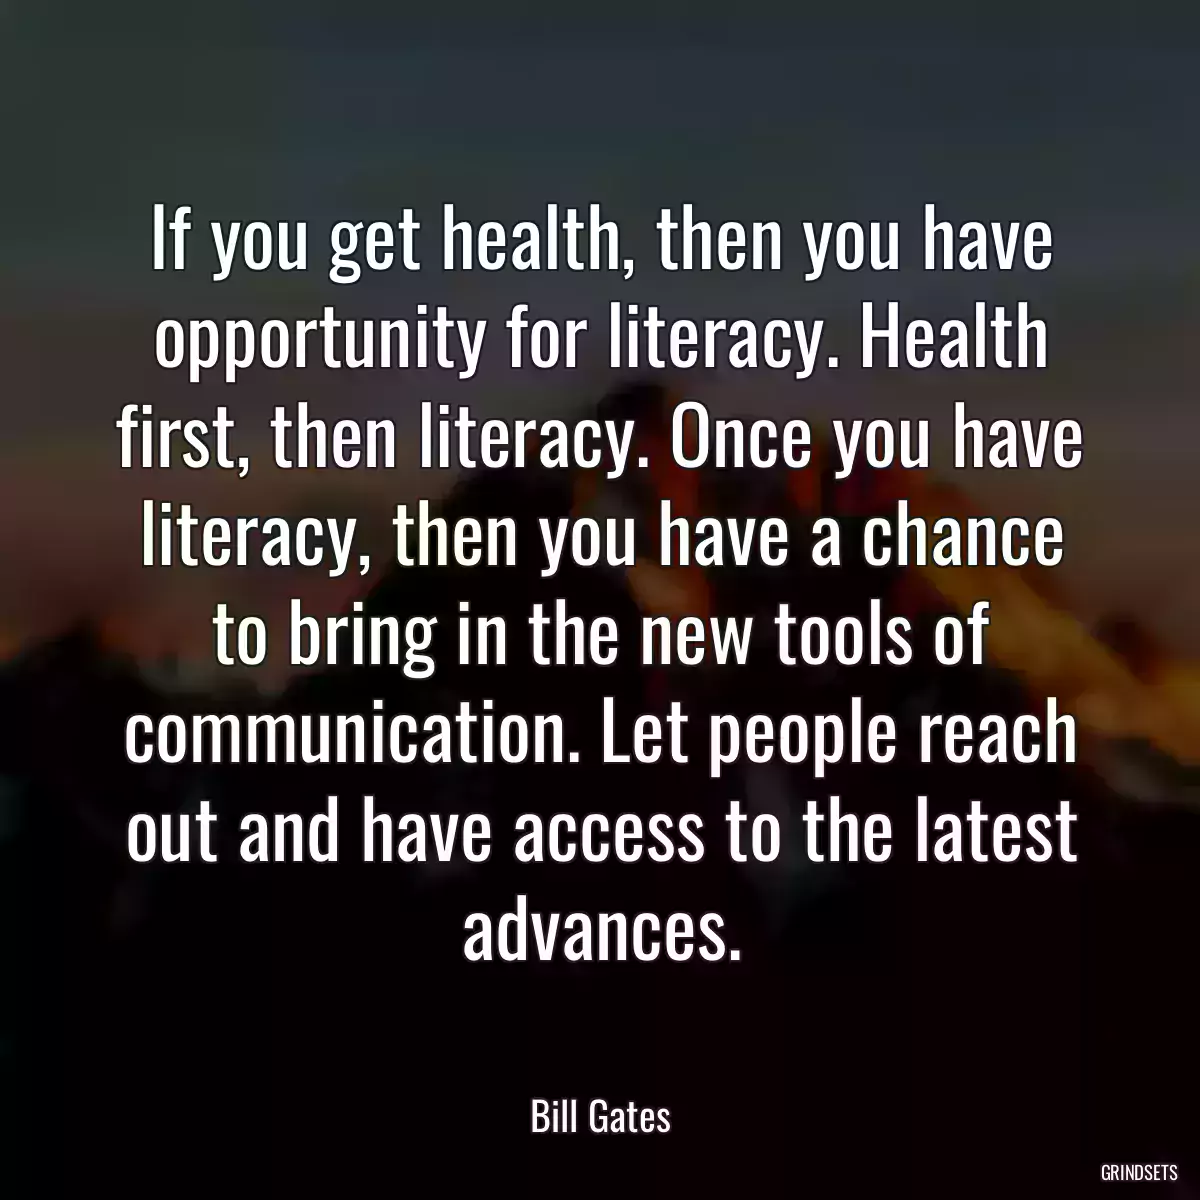 If you get health, then you have opportunity for literacy. Health first, then literacy. Once you have literacy, then you have a chance to bring in the new tools of communication. Let people reach out and have access to the latest advances.